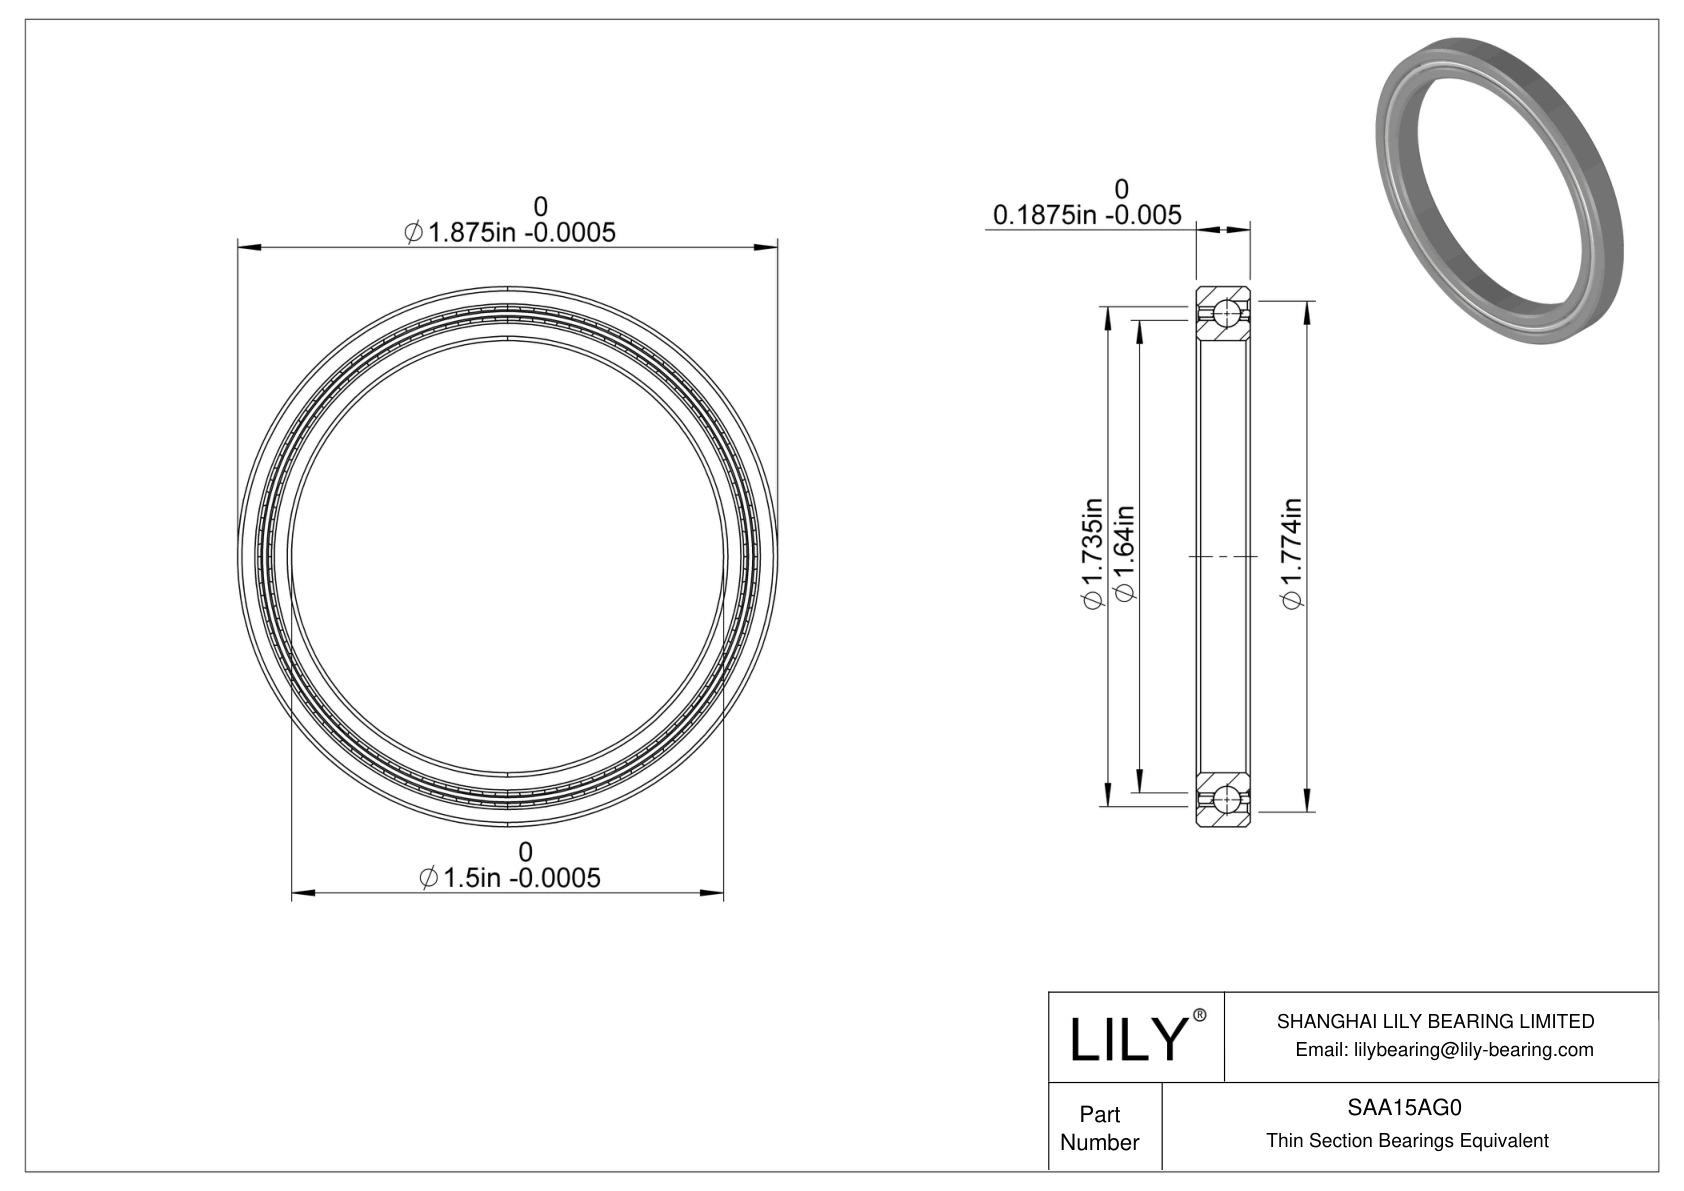 SAA15AG0 Constant Section (CS) Bearings cad drawing